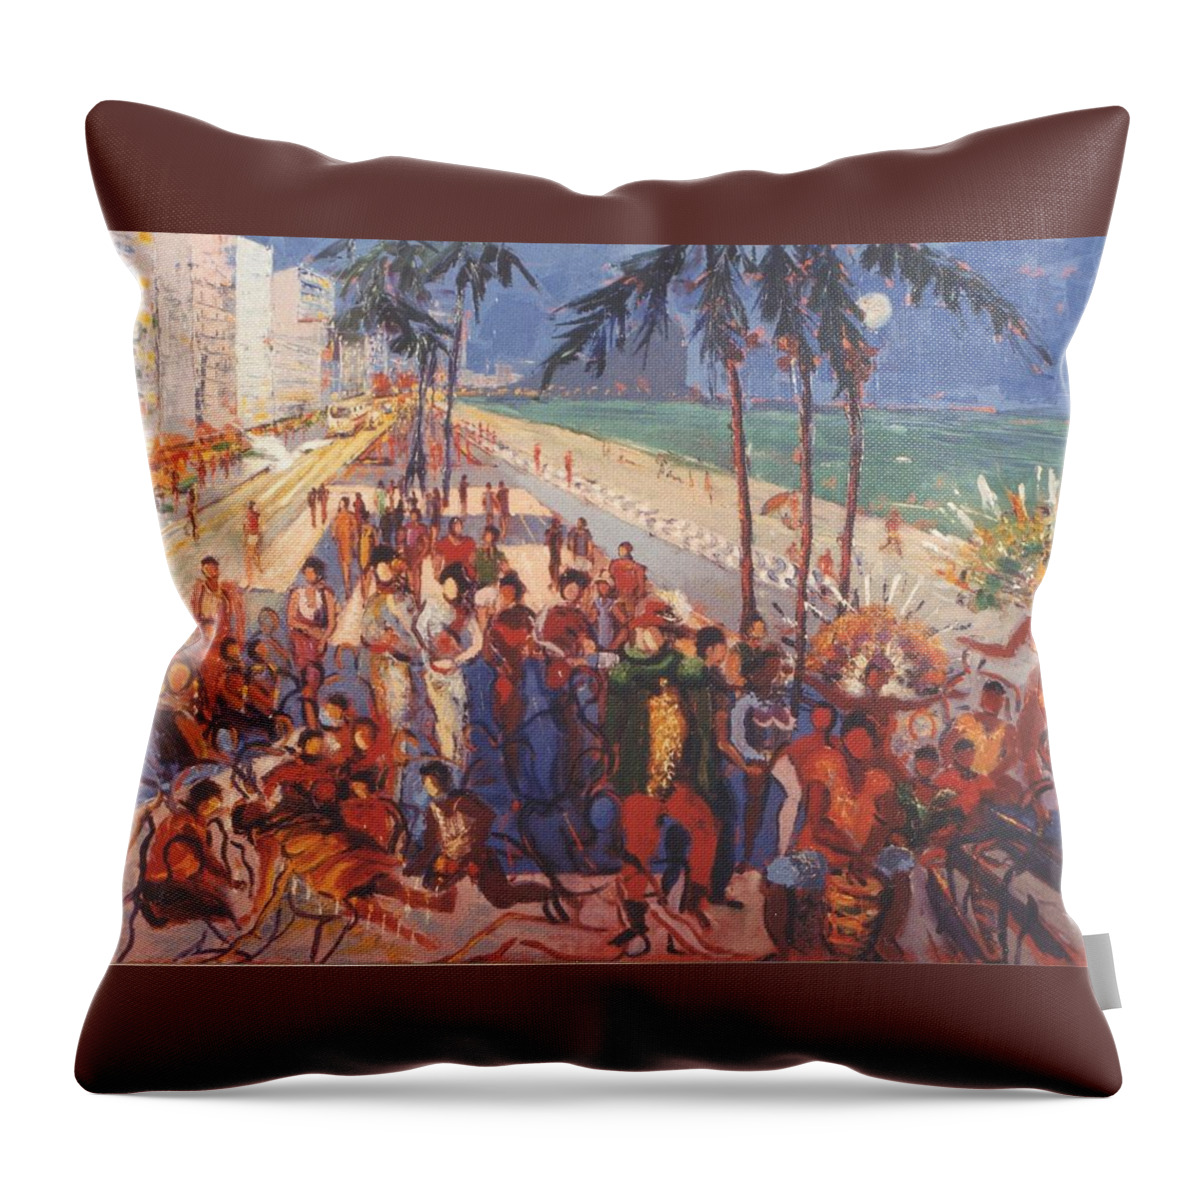 Rio De Janeiro Throw Pillow featuring the painting Happening by Walter Casaravilla